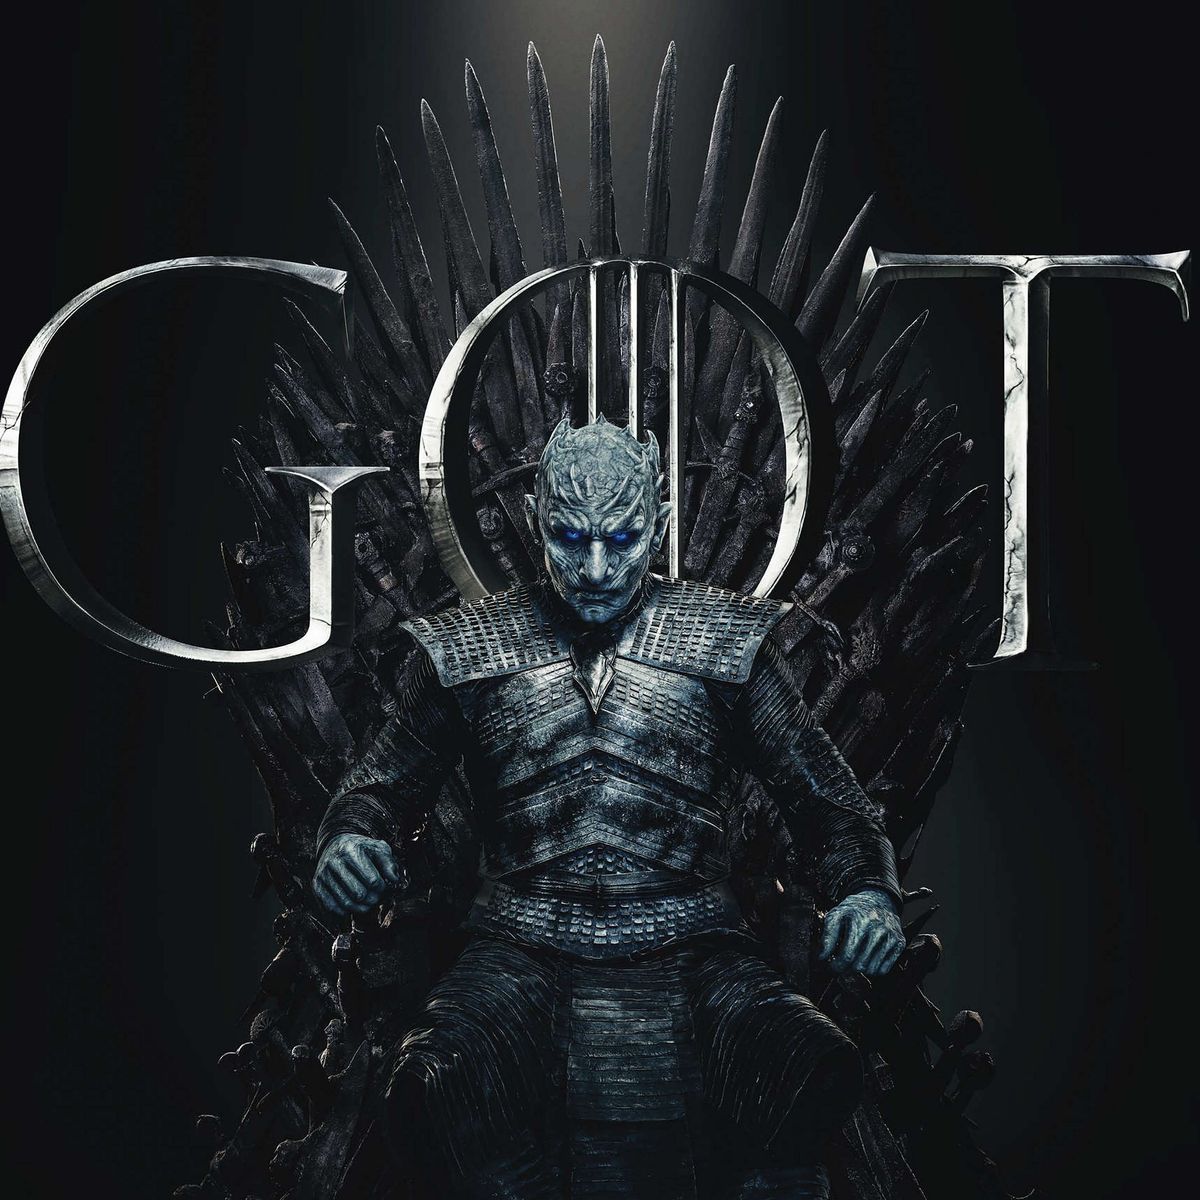 How Game Of Thrones Made All Those Viral Posters